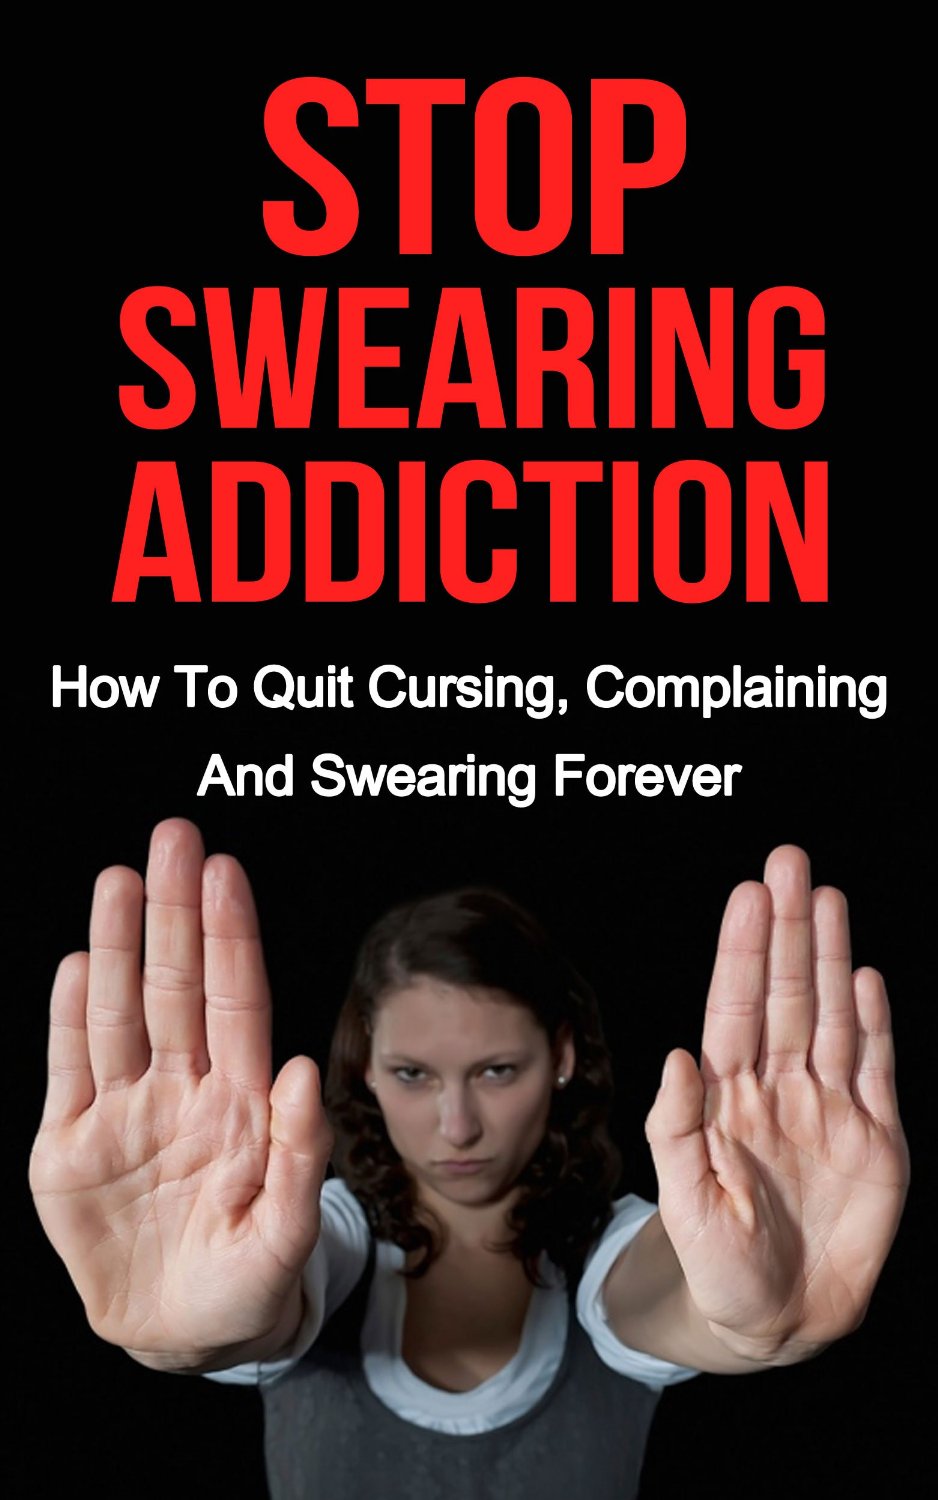 FREE: Stop Swearing Addiction: How To Quit Cursing, Complaining And Swearing Forever by Billy Allen